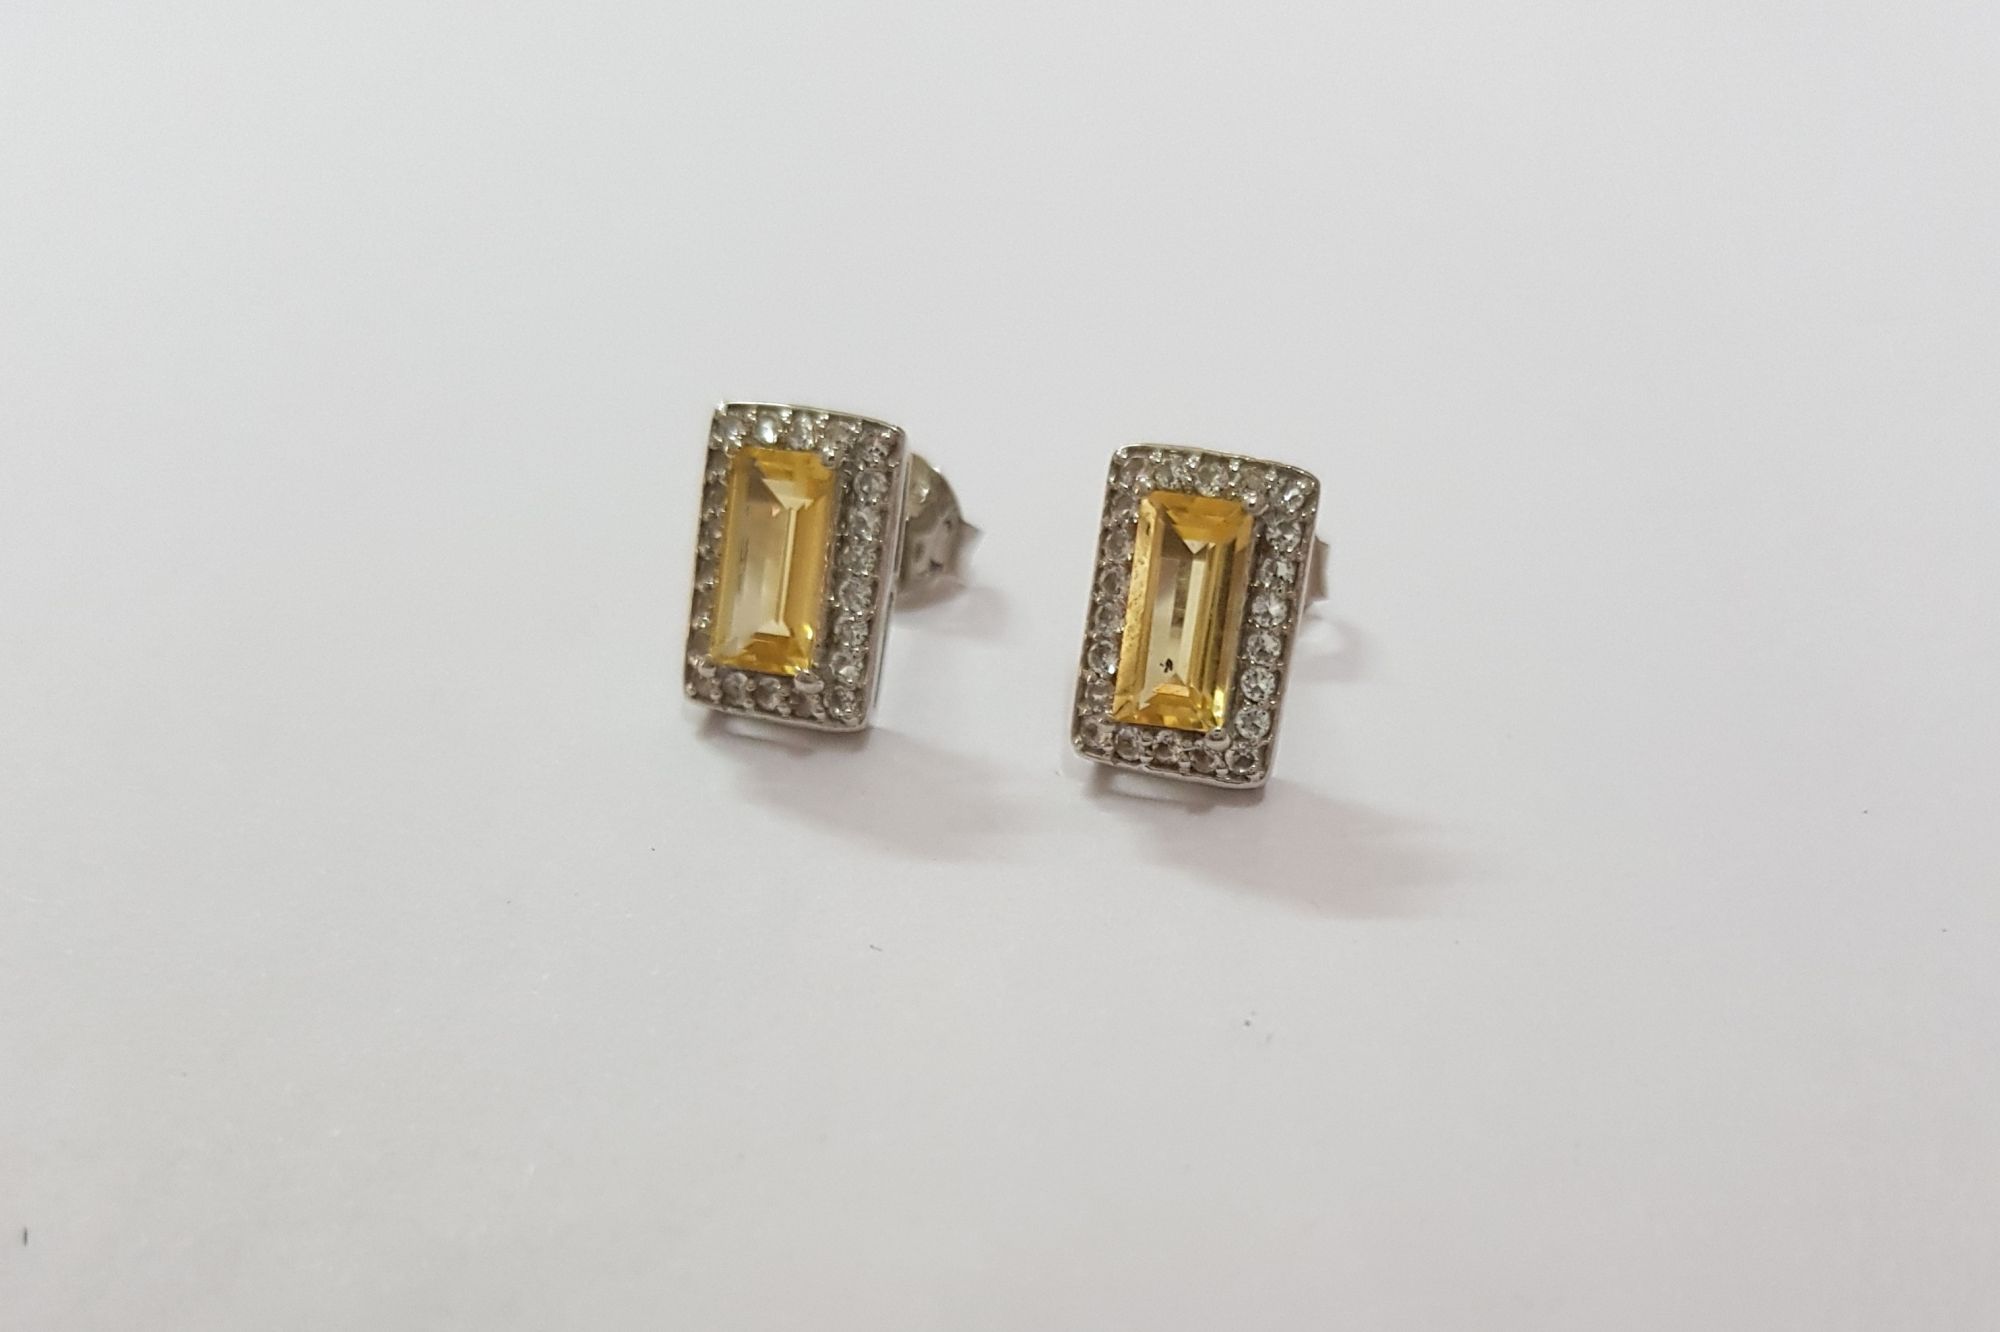 Earrings with White topaz and Citrine